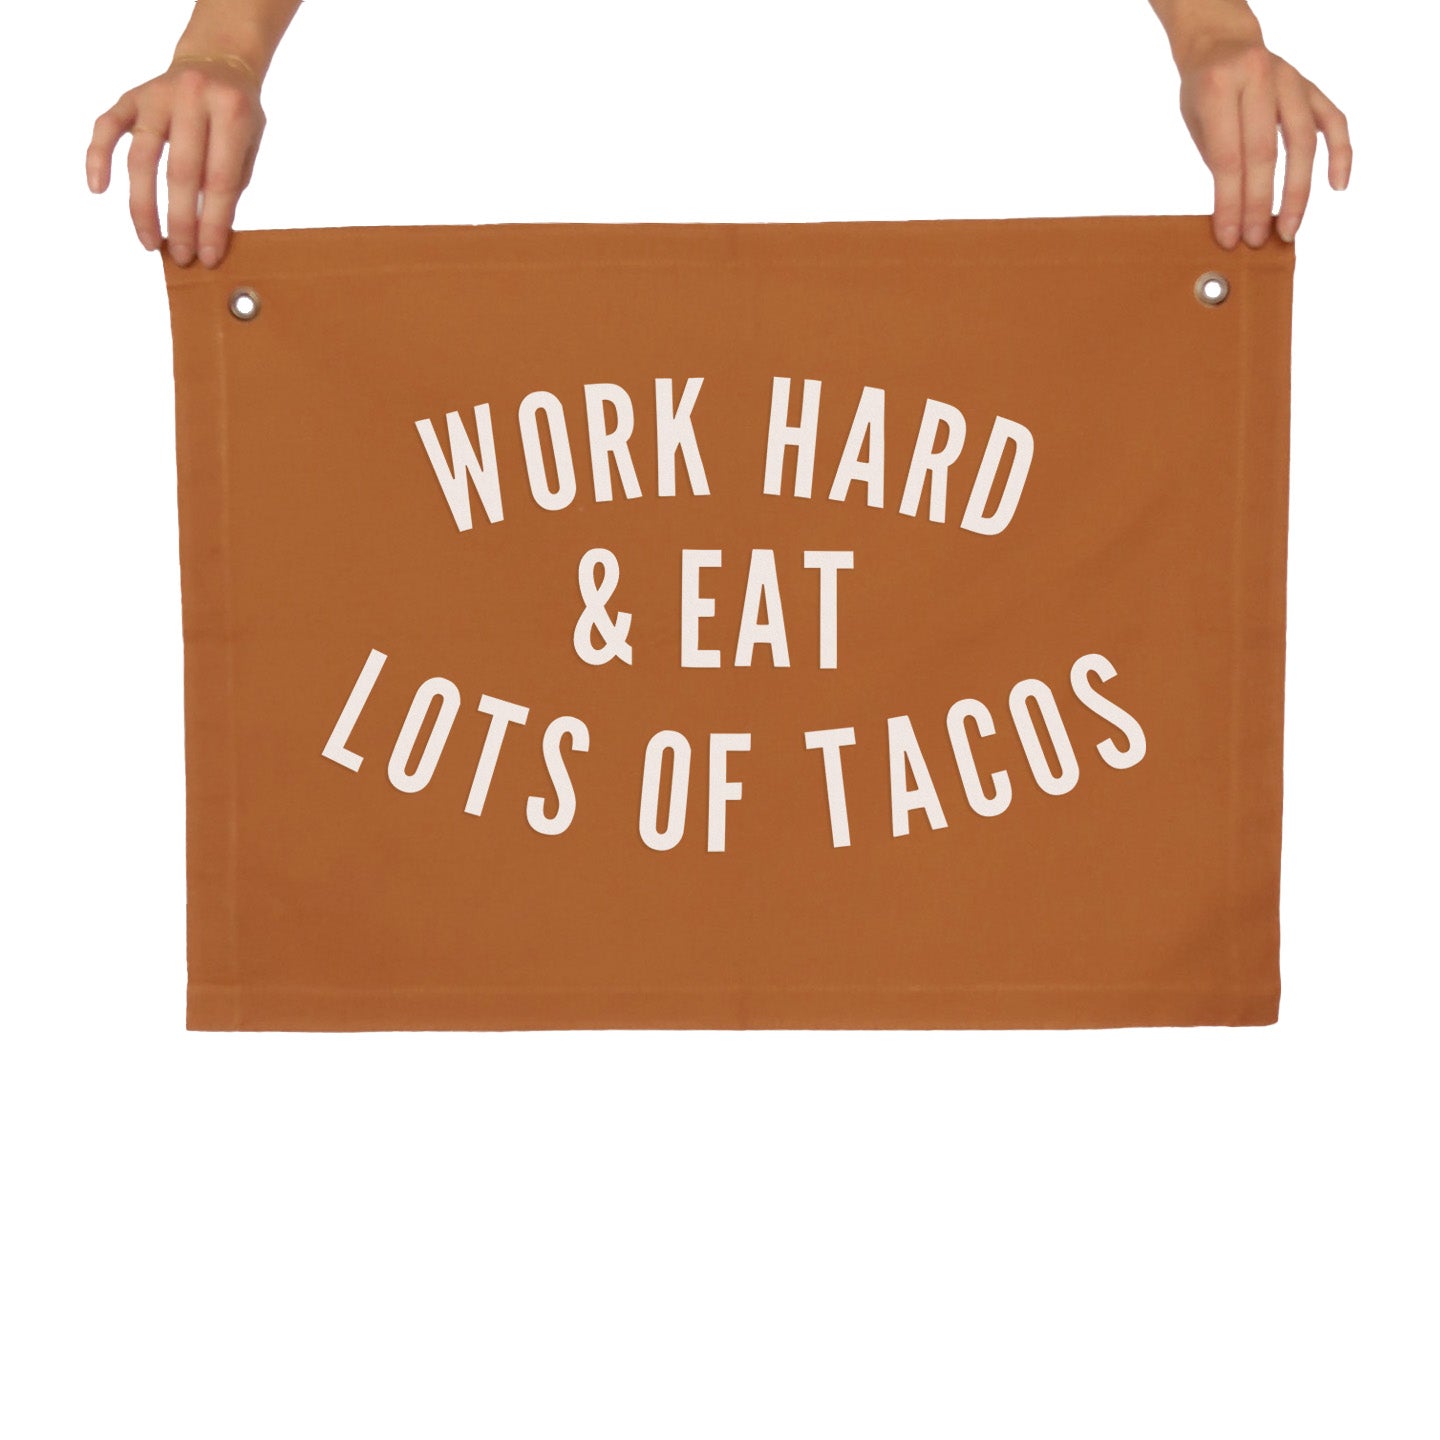 Work Hard & Eat Lots of Tacos Large Canvas Flag